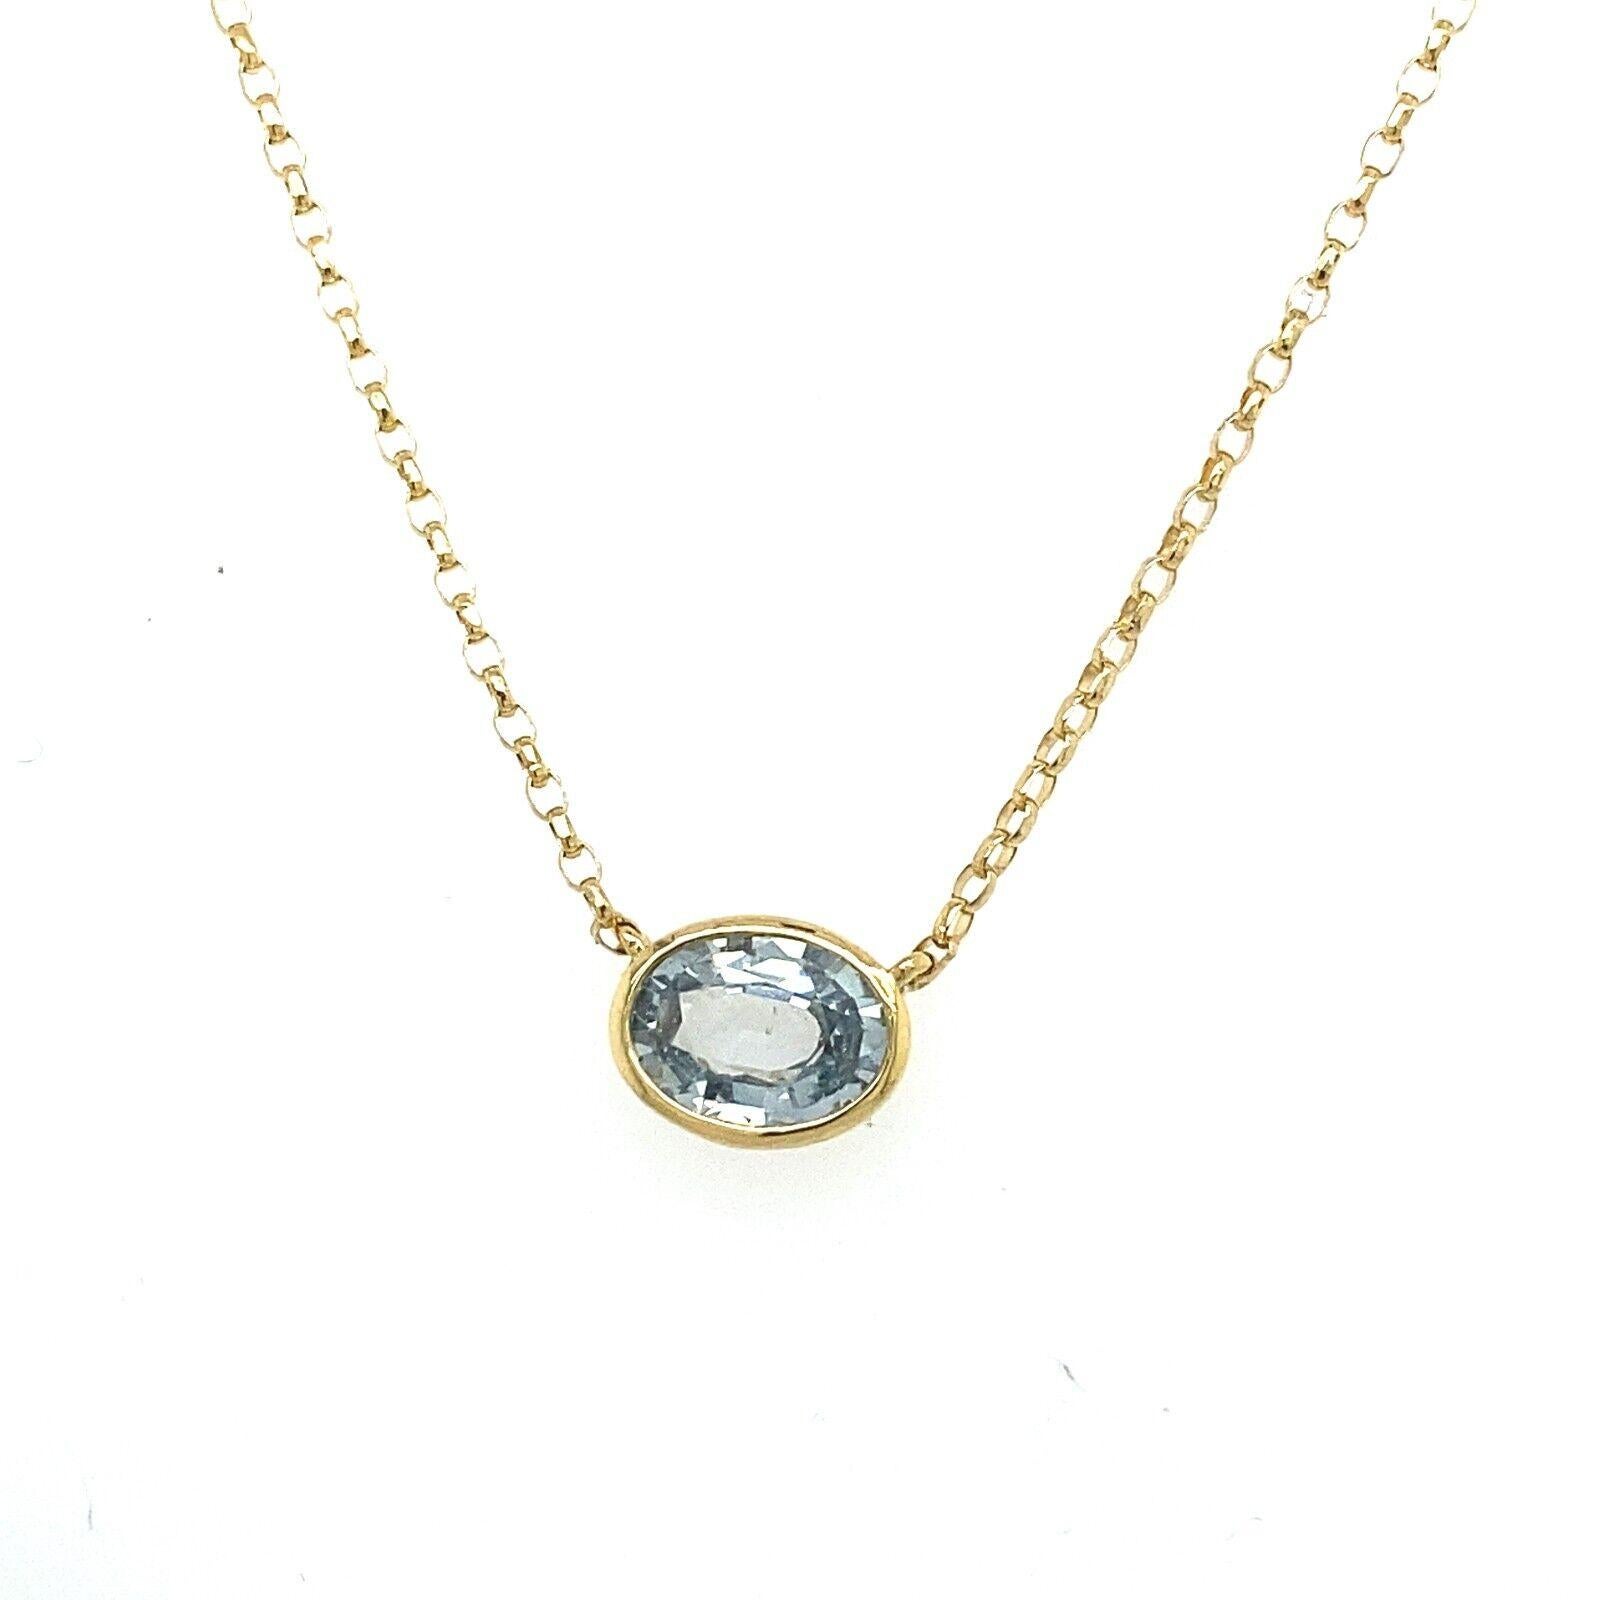 This beautiful pendant rubover setting is set with a 0.75ct oval shaped Aquamarine gemstone. The gem is set in an 18ct Yellow Gold frame, suspended on 16